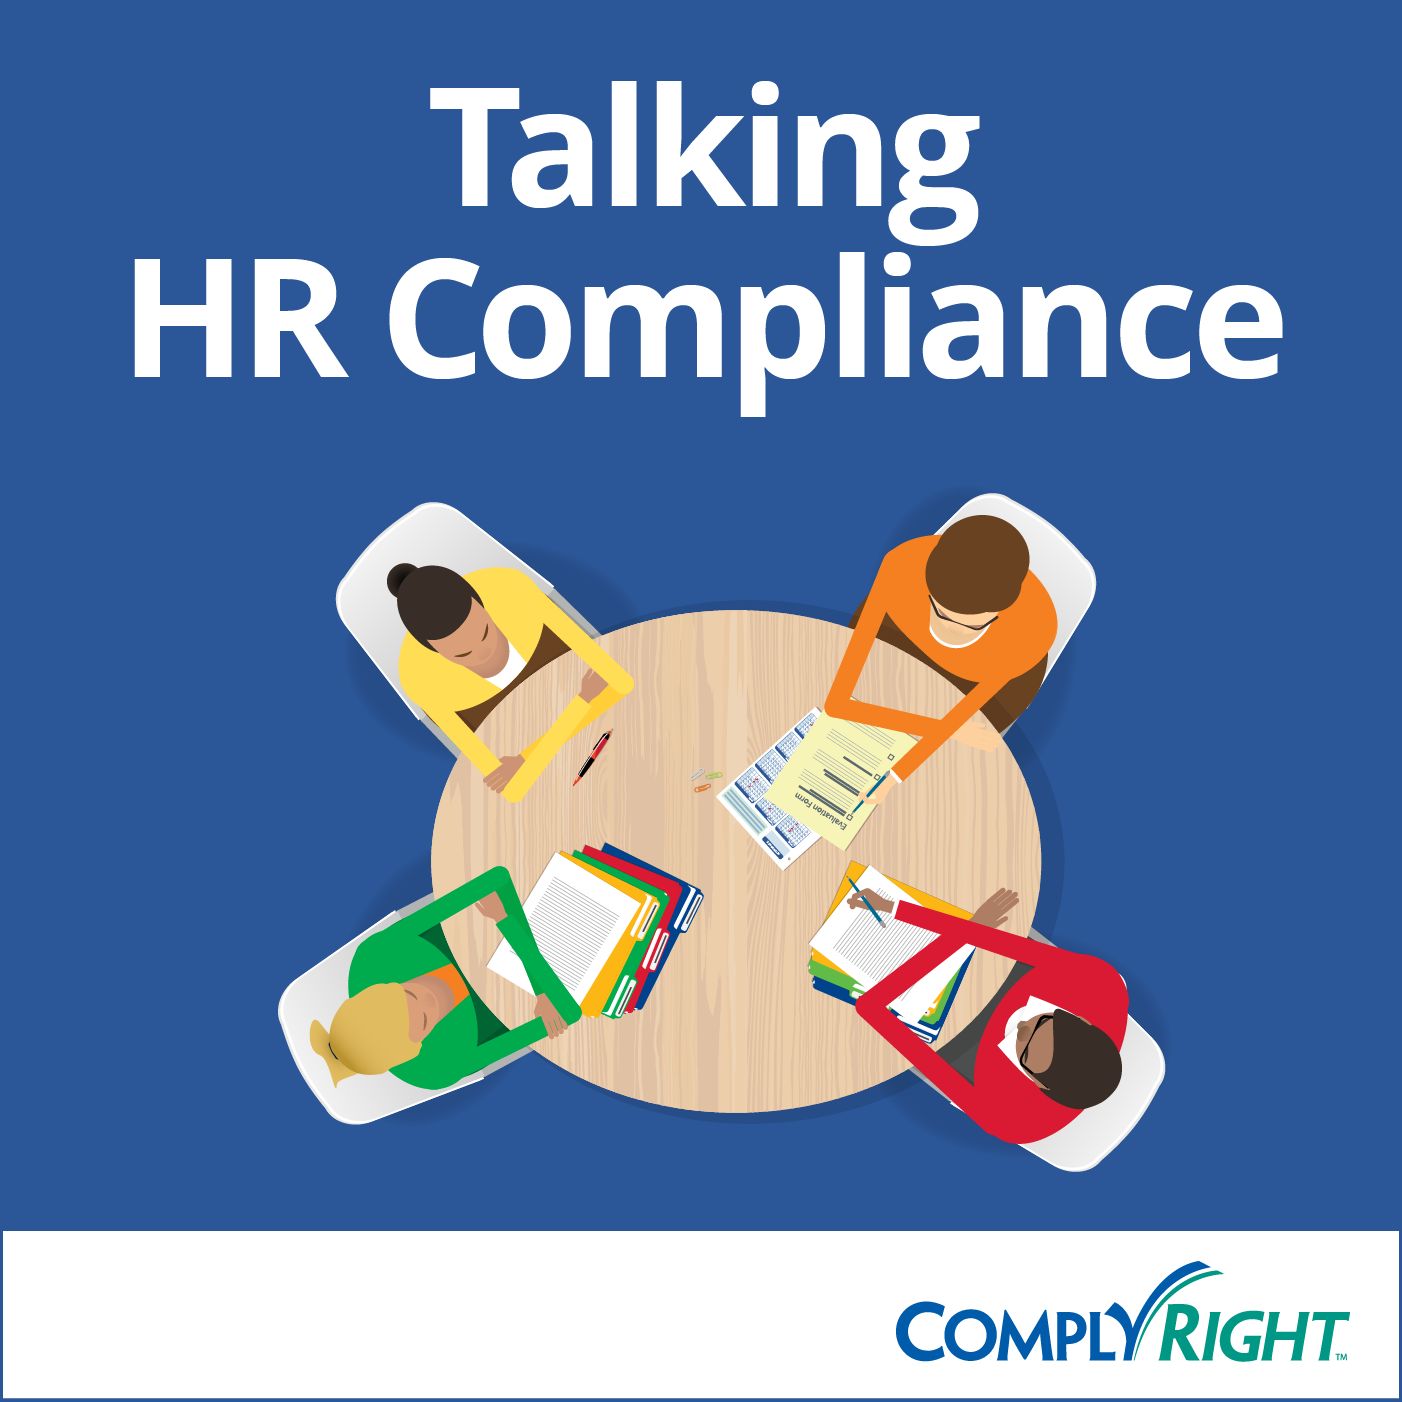 Talking HR Compliance — A Small Business Podcast podcast show image